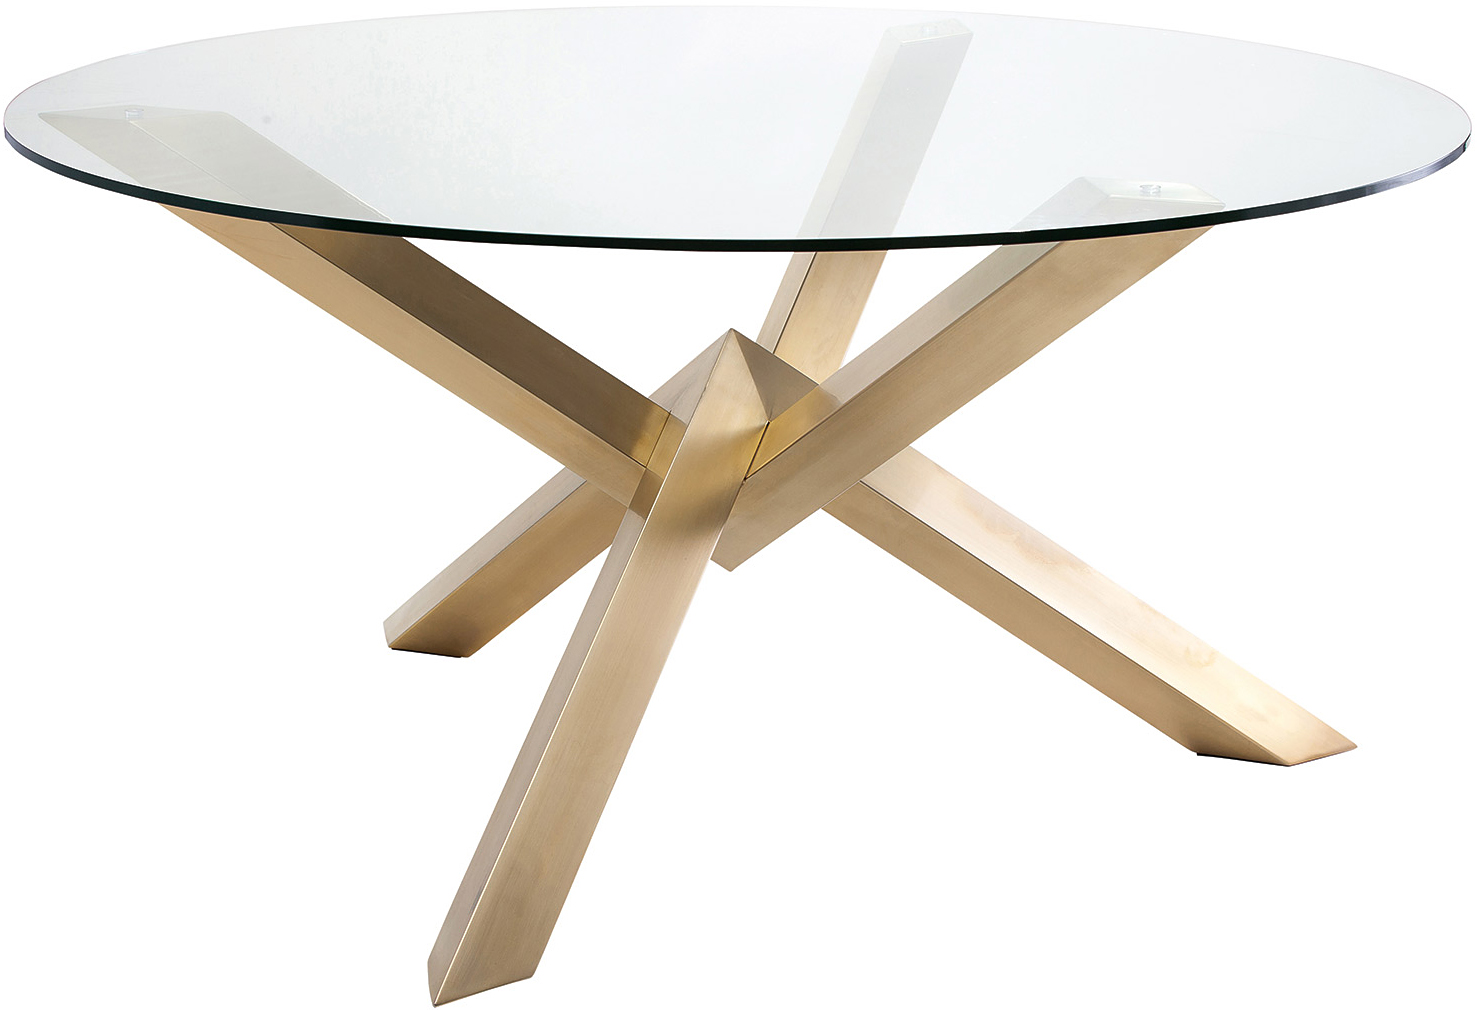 the nuevo living hgtb383 costa dining table